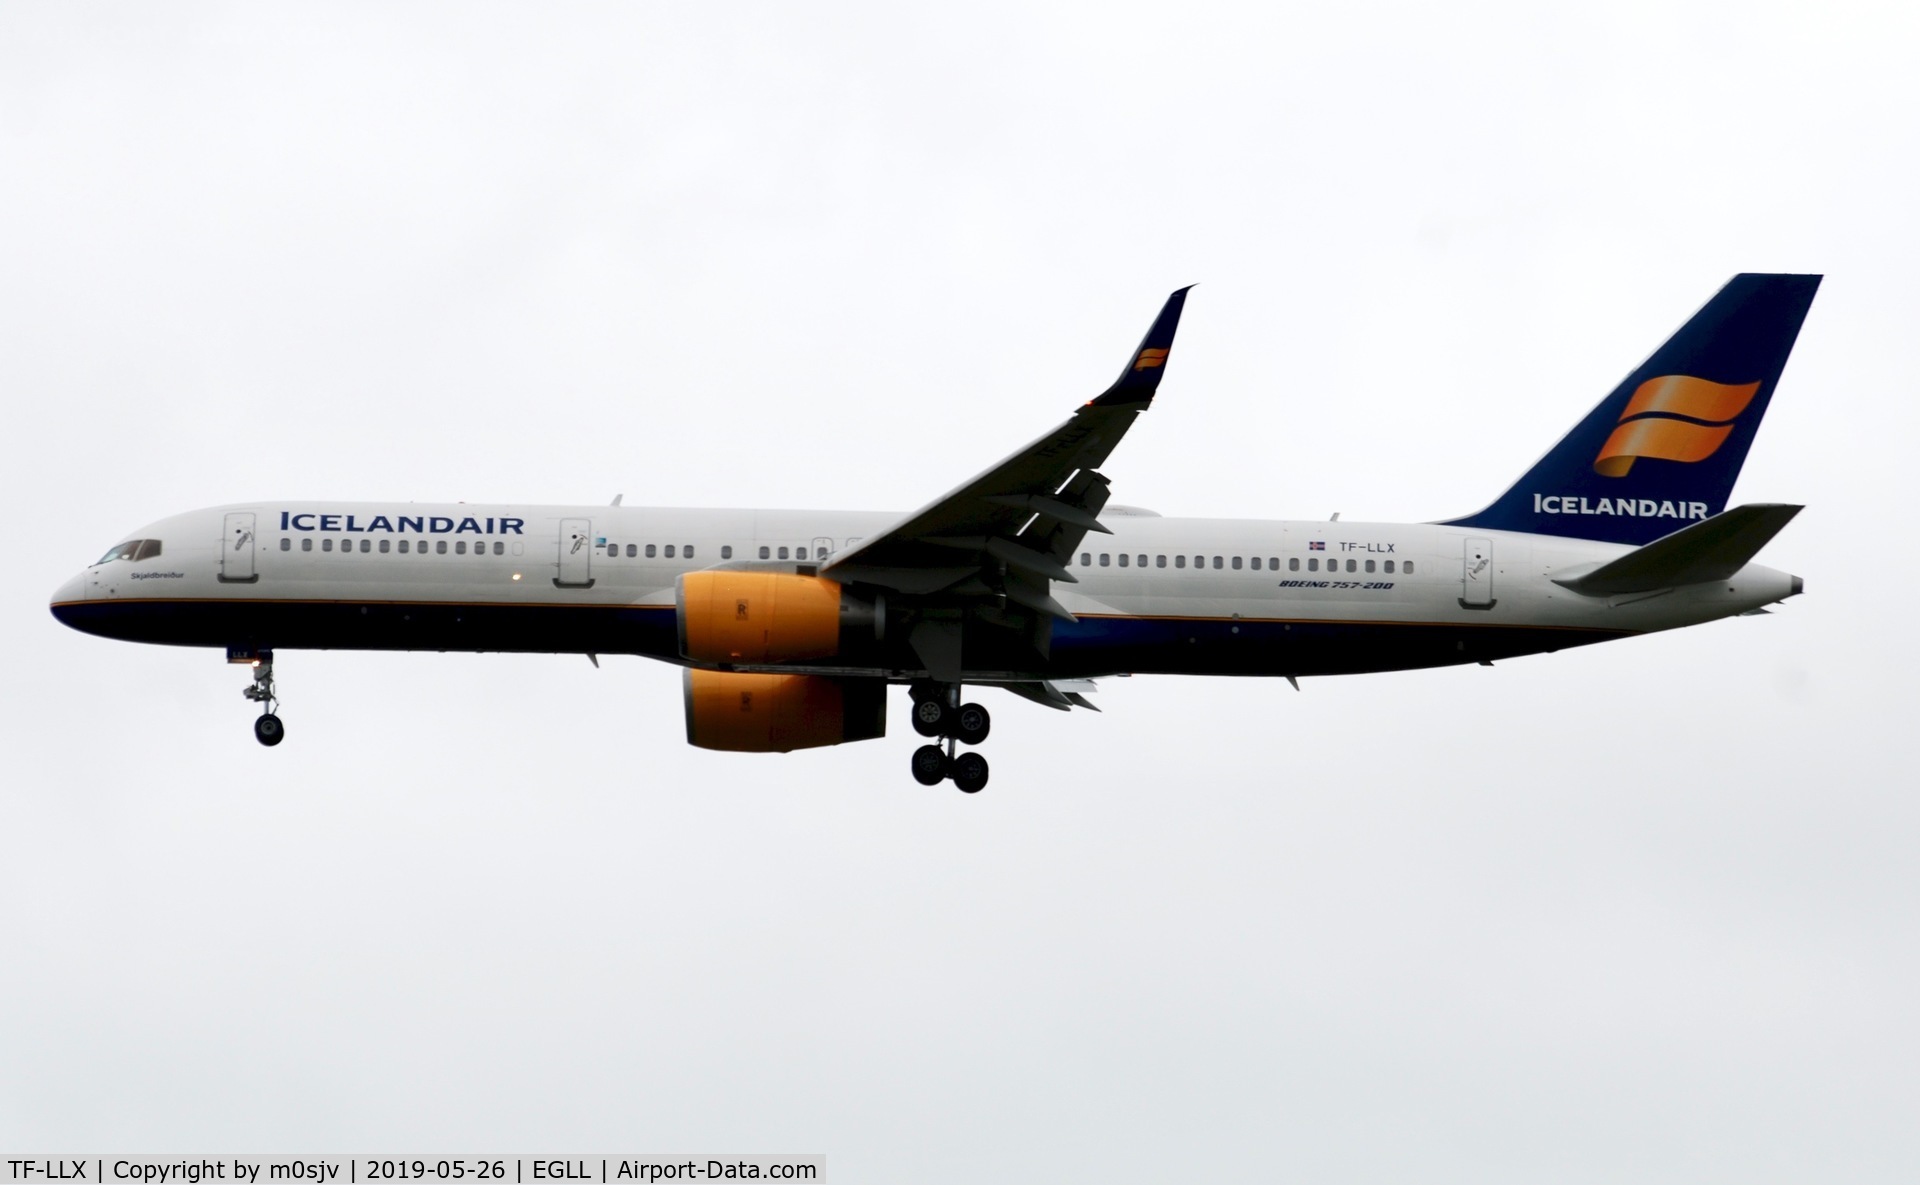 TF-LLX, 2000 Boeing 757-256 C/N 29311, Taken from various locations around the 27L/R landing zones